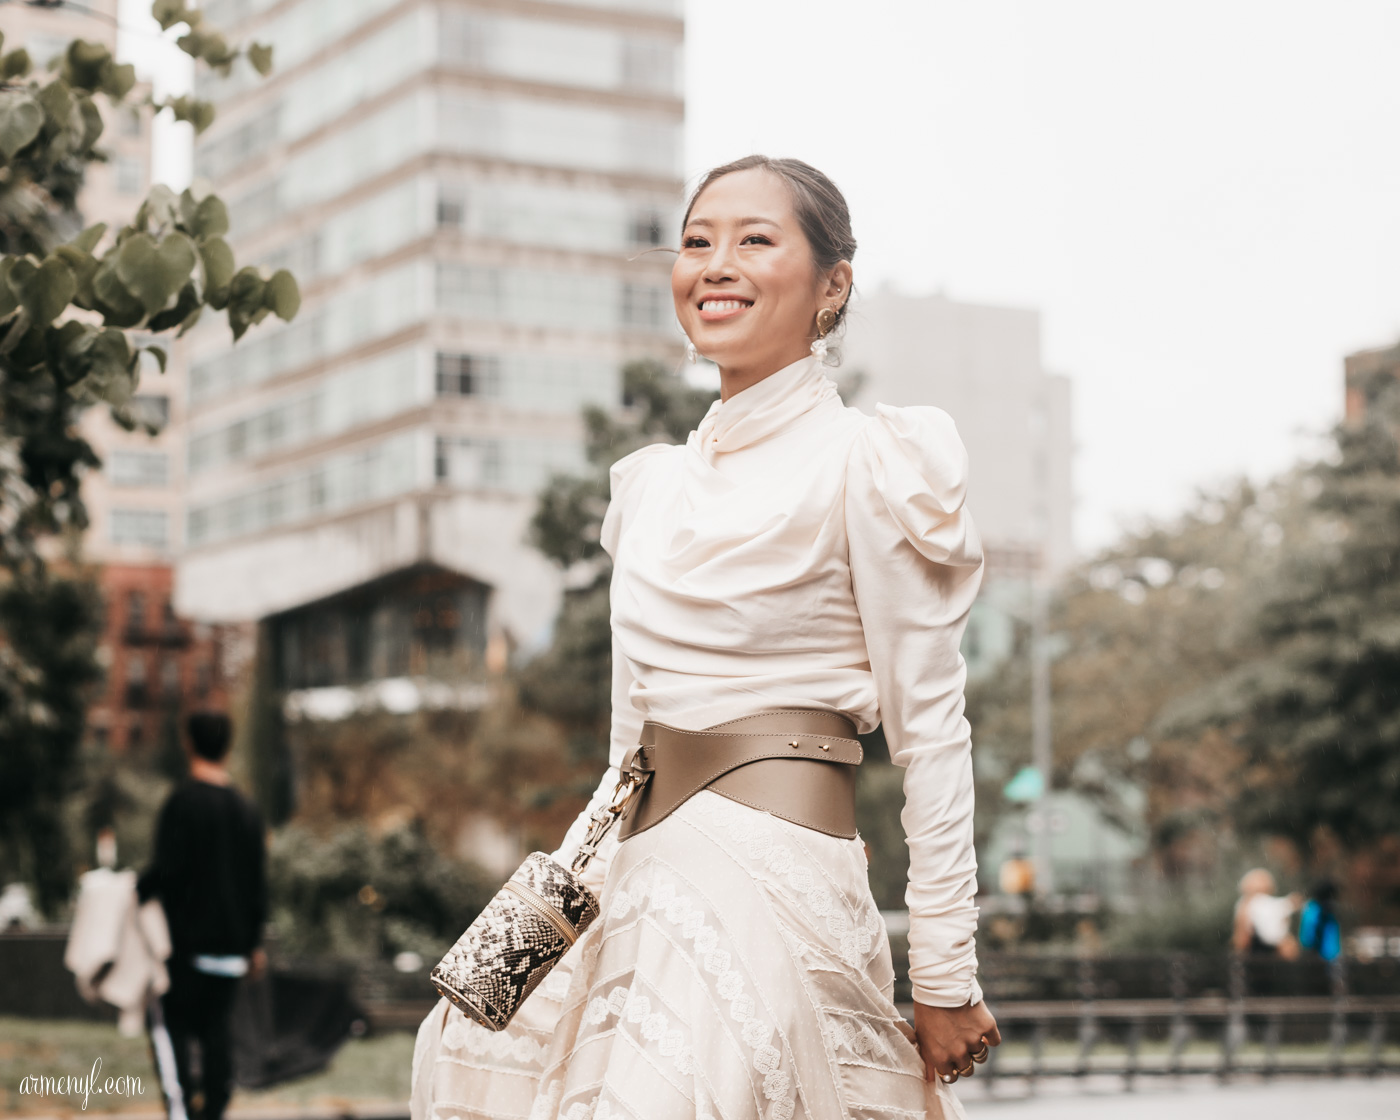 Aimee Song / Song of style in Zimmerman at New York Fashion Week SS 19 photo by Armenyl